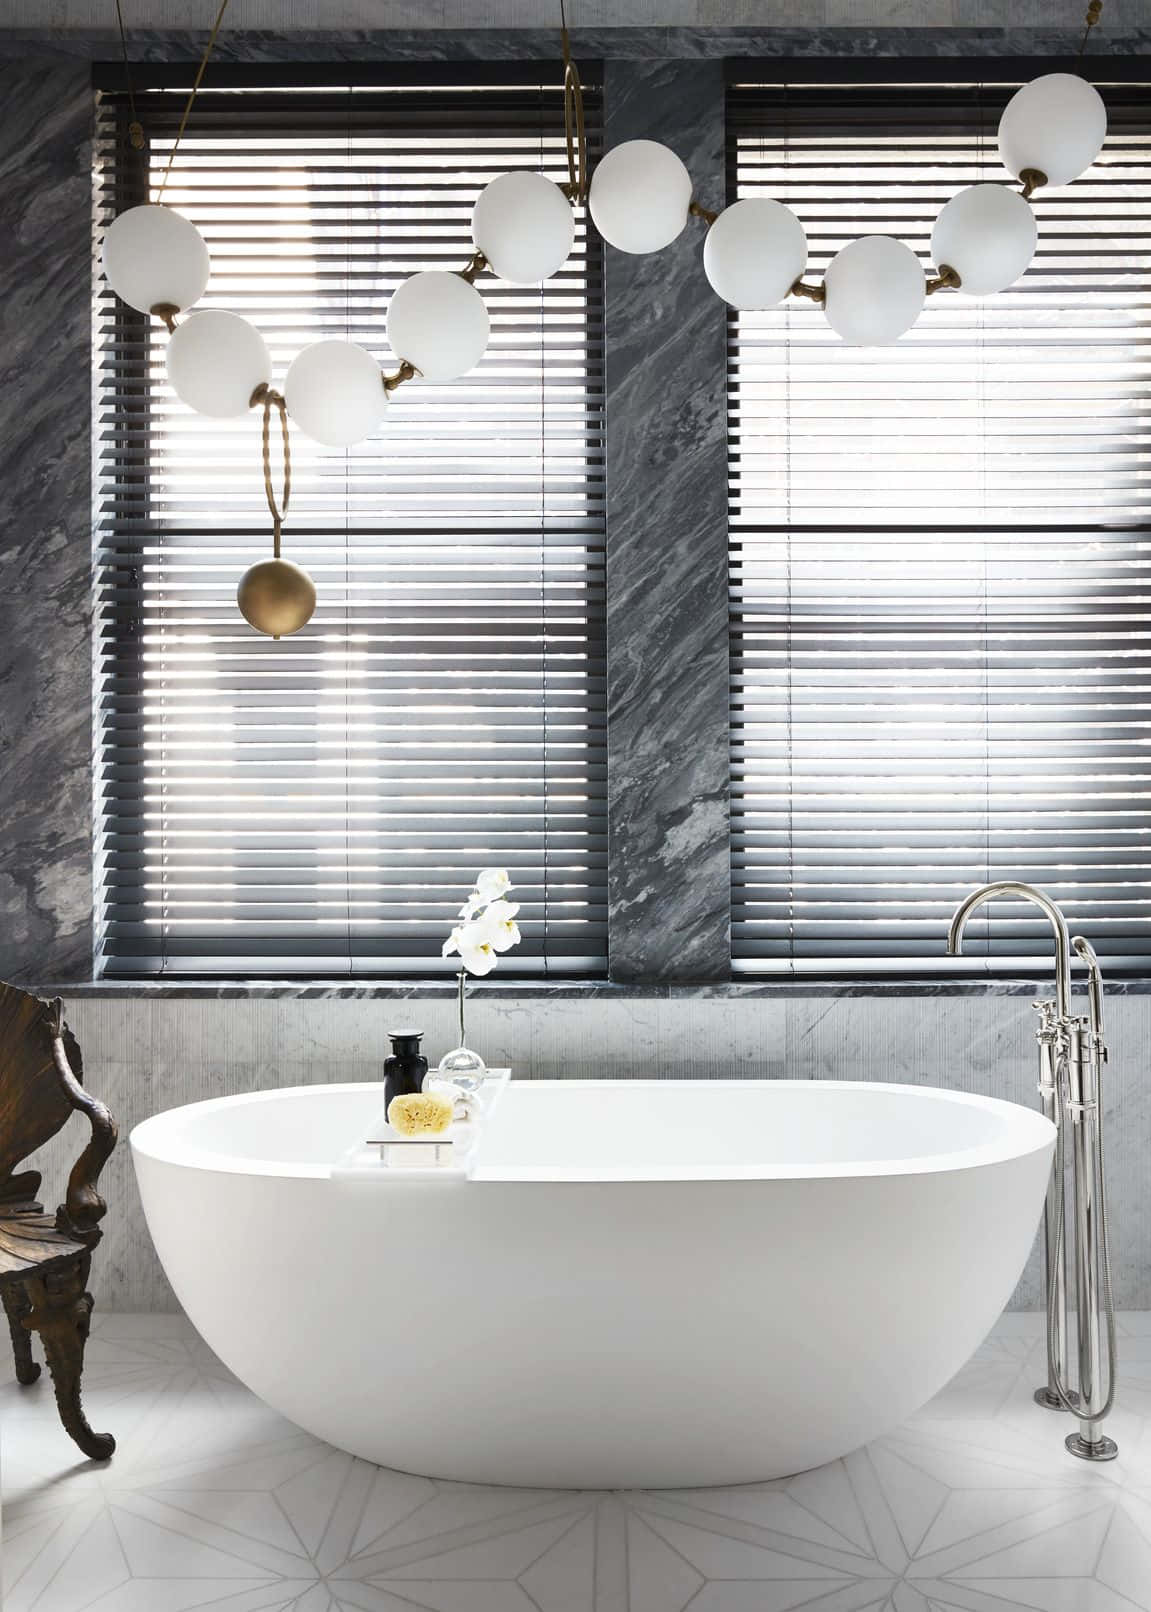 "Relax and Unwind In This Black and White Bathroom"